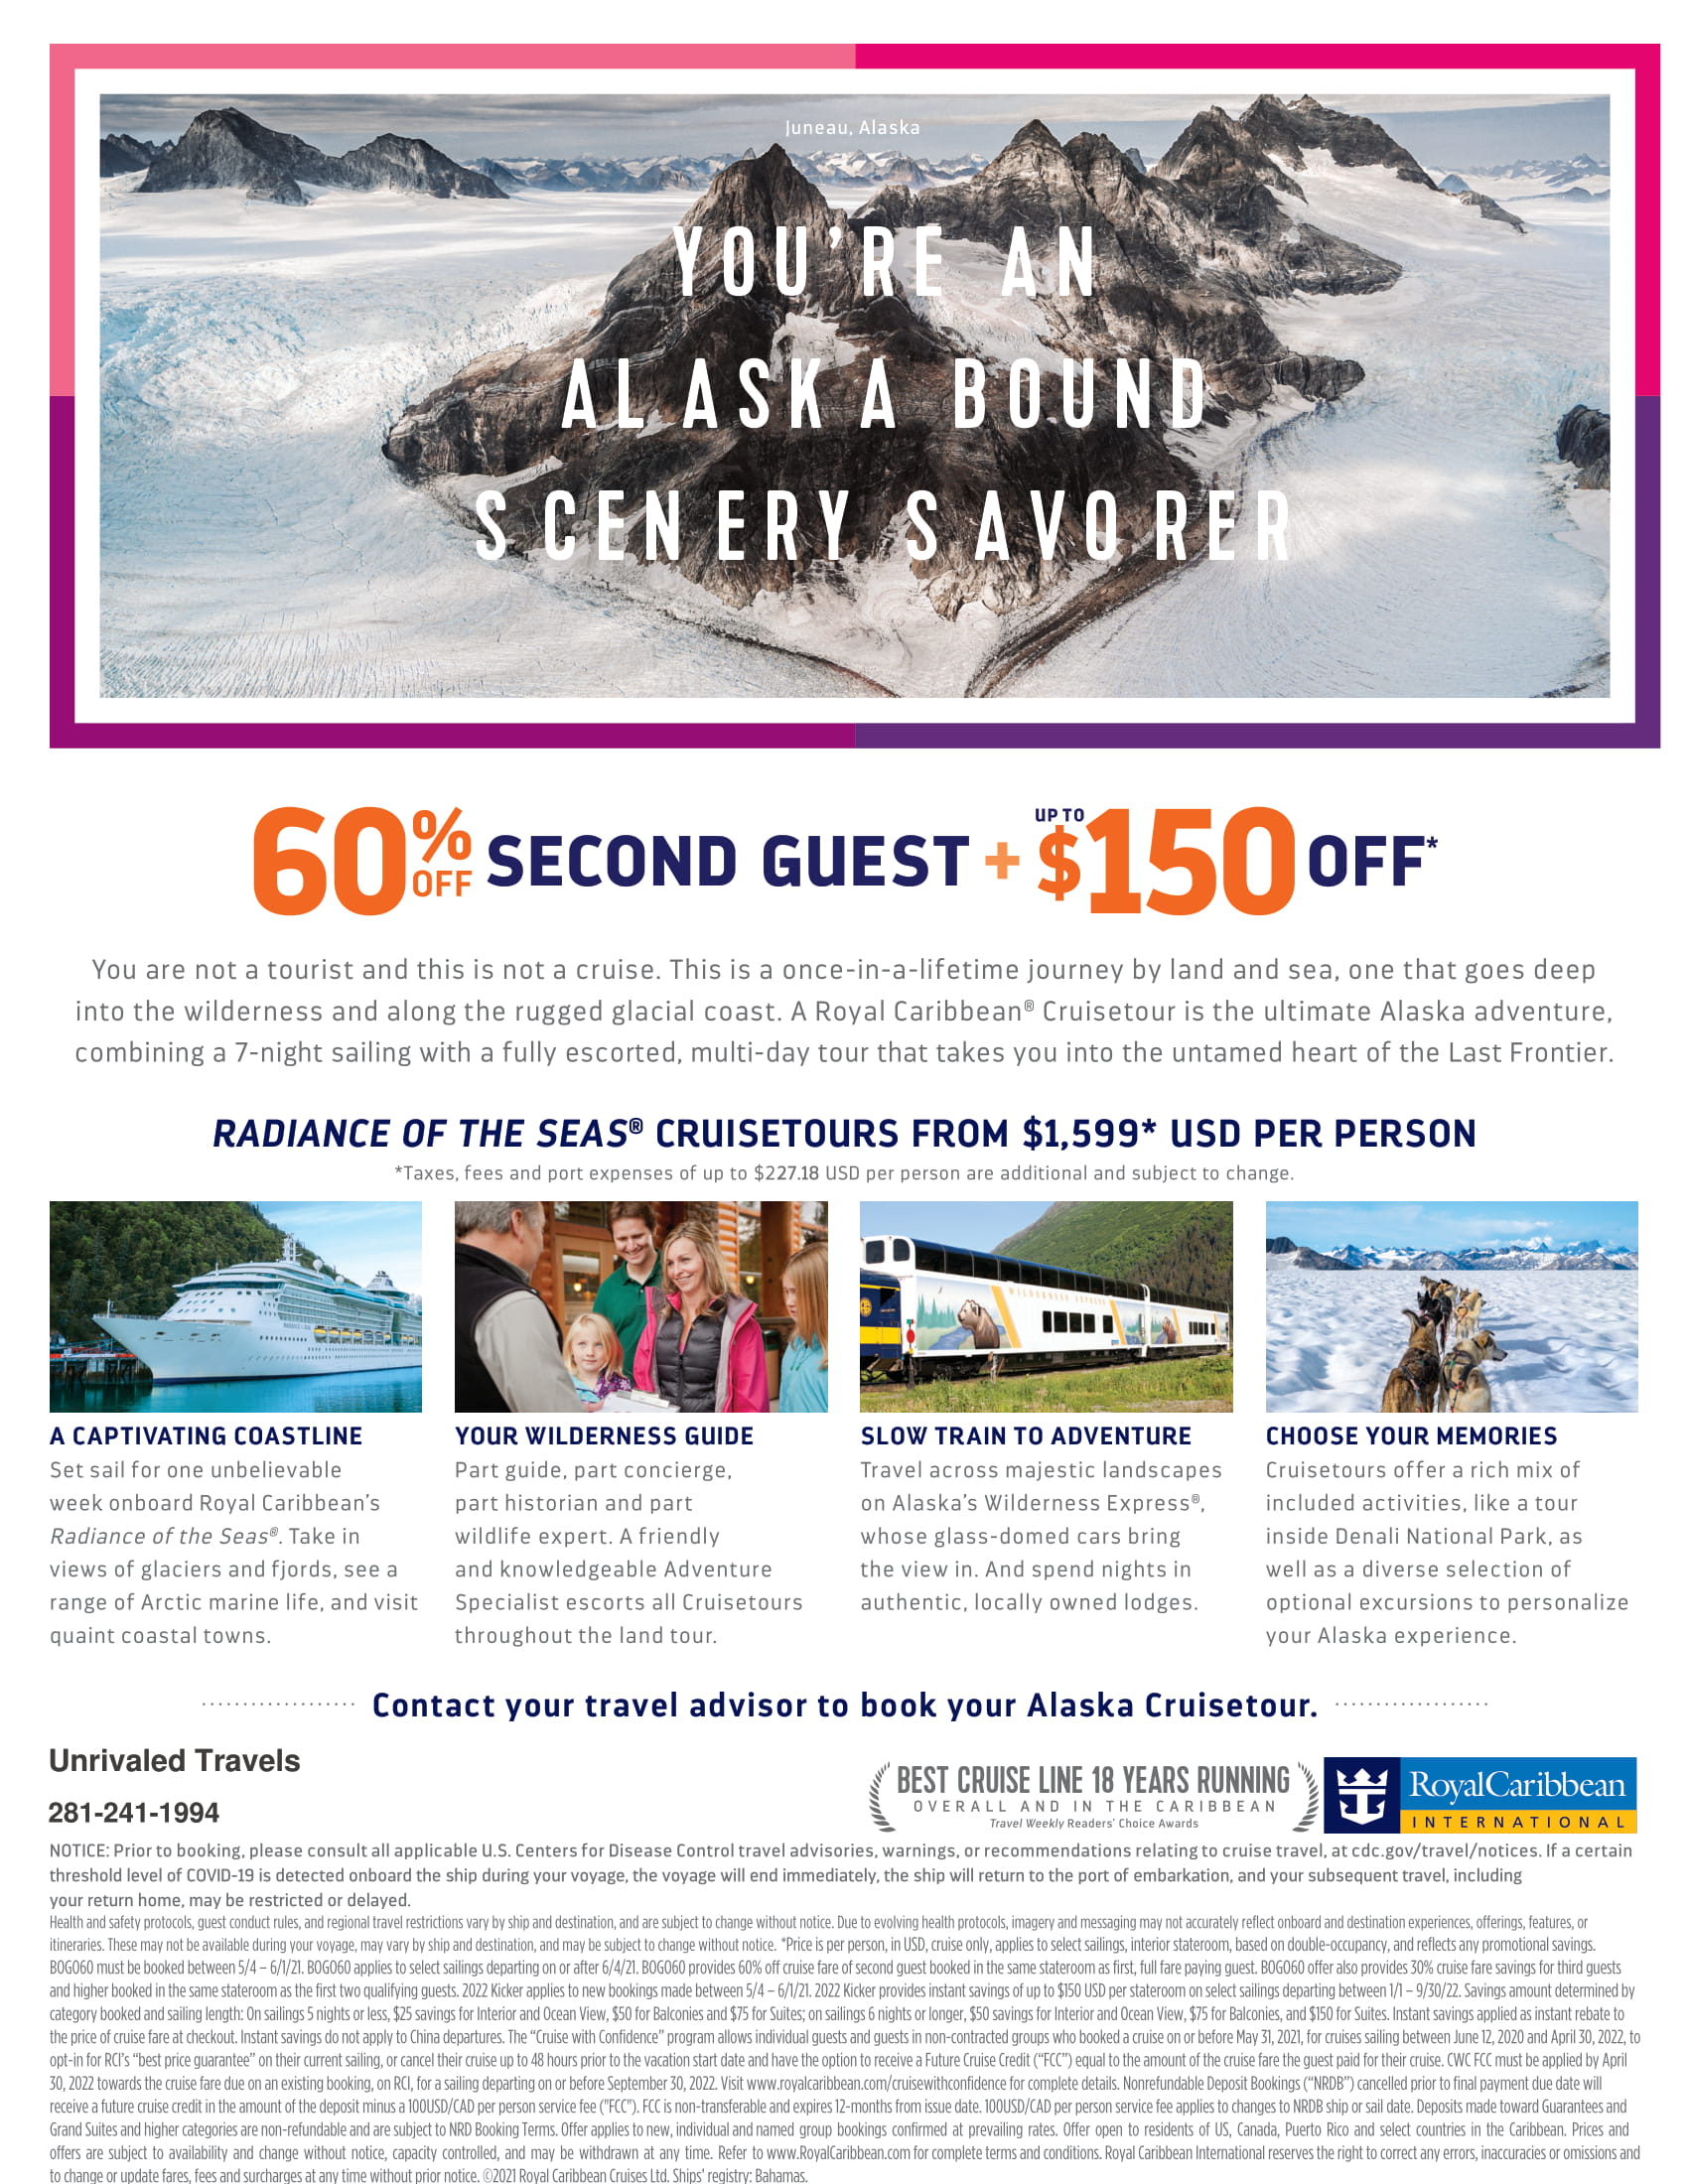 Cruisetours_Monthly_Flyer (with contact info)-1